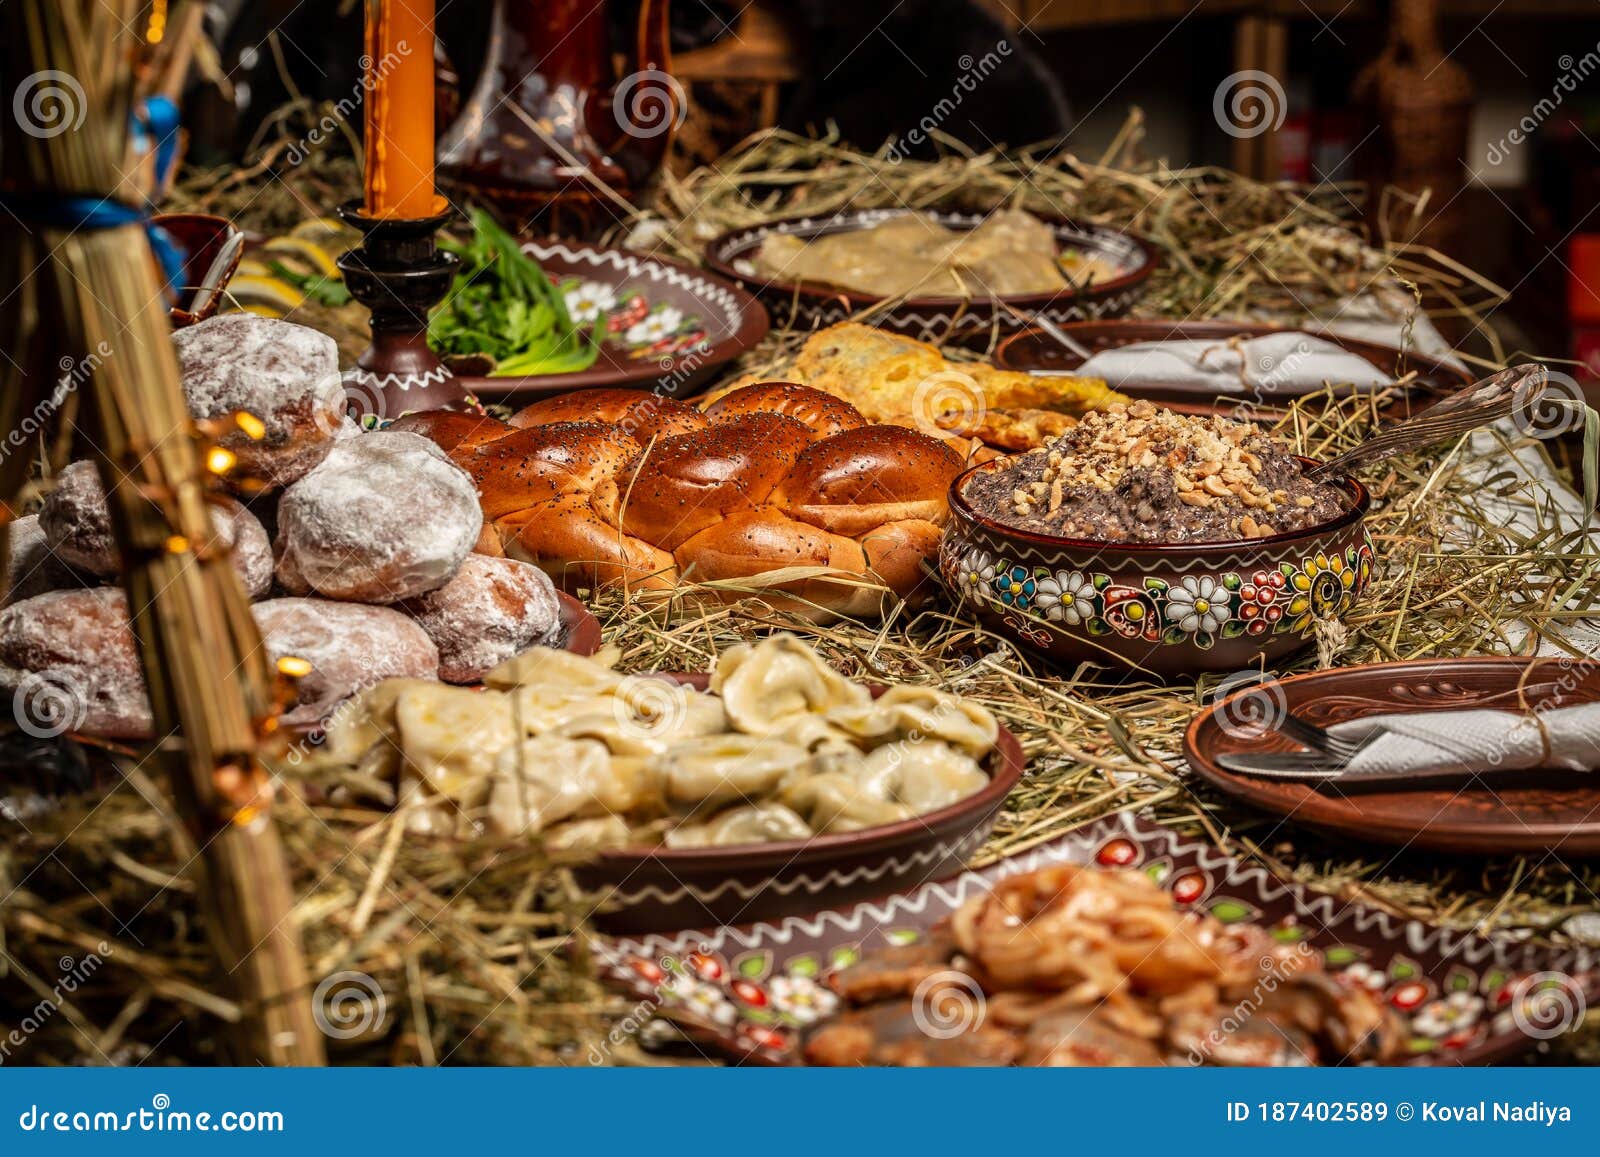 Traditional Christmas Eve Dinner Held On The Twenty Fourth Of December Many Traditions Of Both Pagan And Christian Origin Holy Stock Image Image Of Interior Delicious 187402589